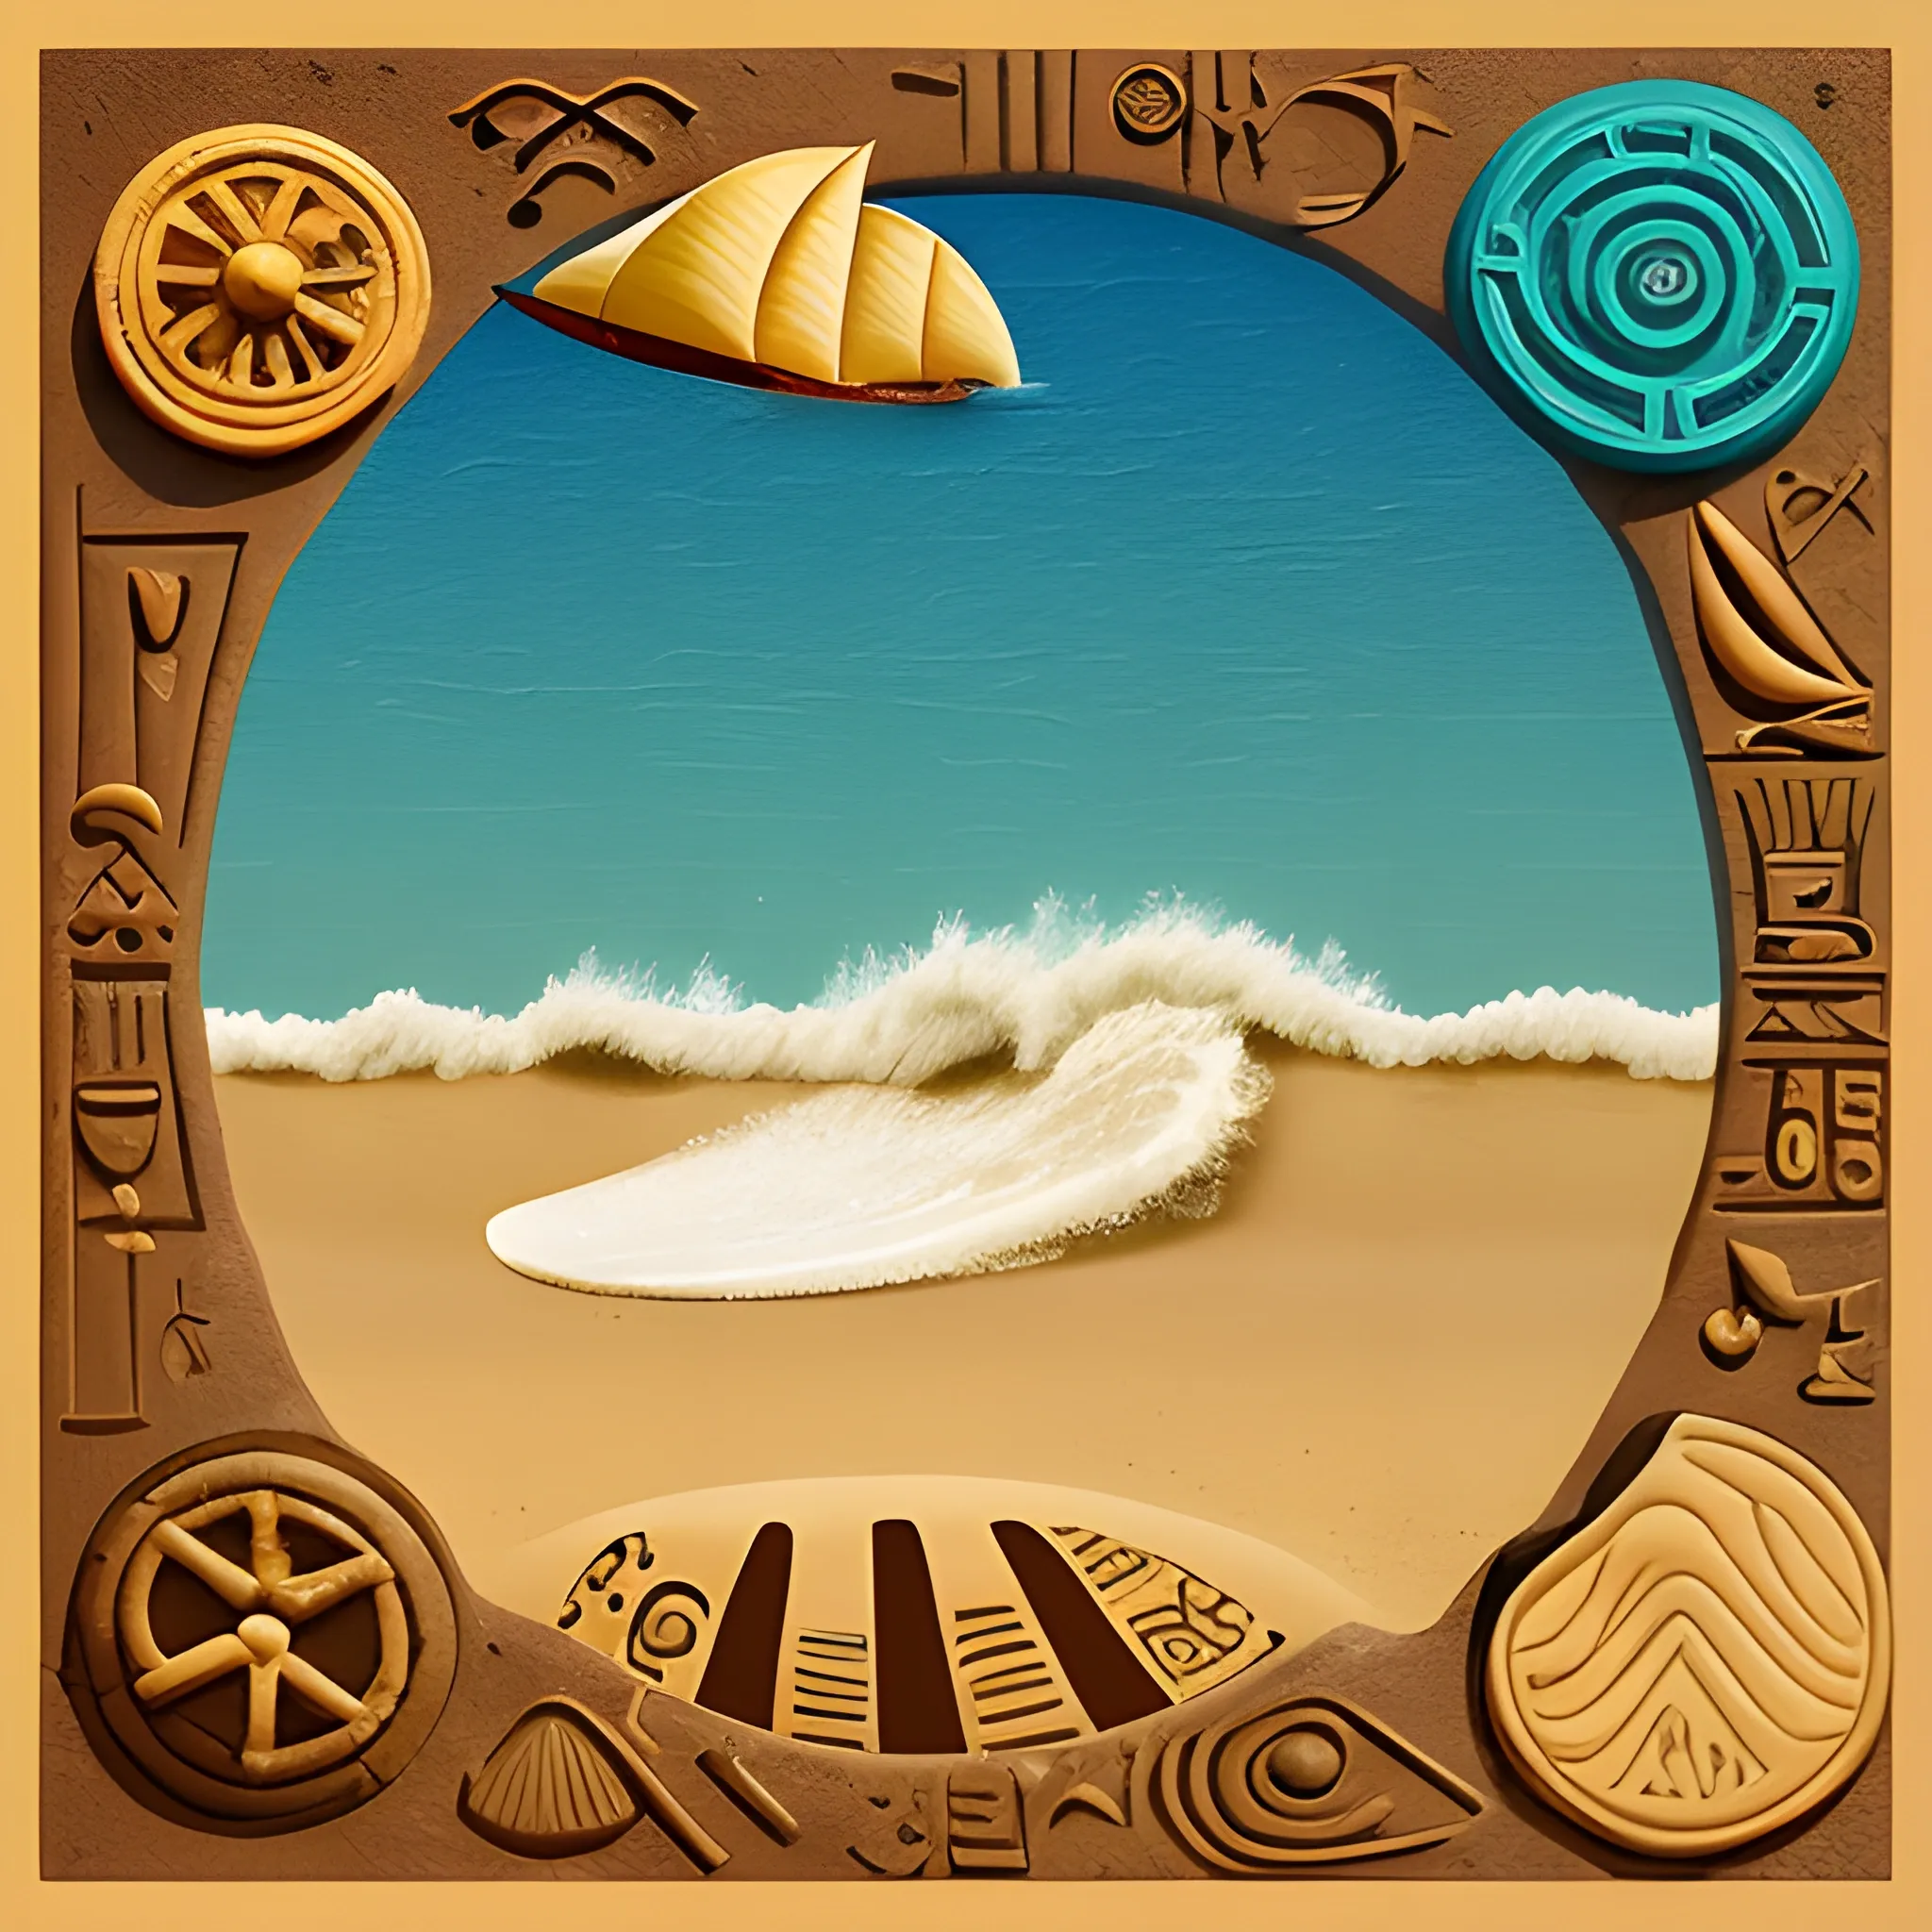 create ancient hieroglyphs that represent travel, ocean waves, camping, surfing
